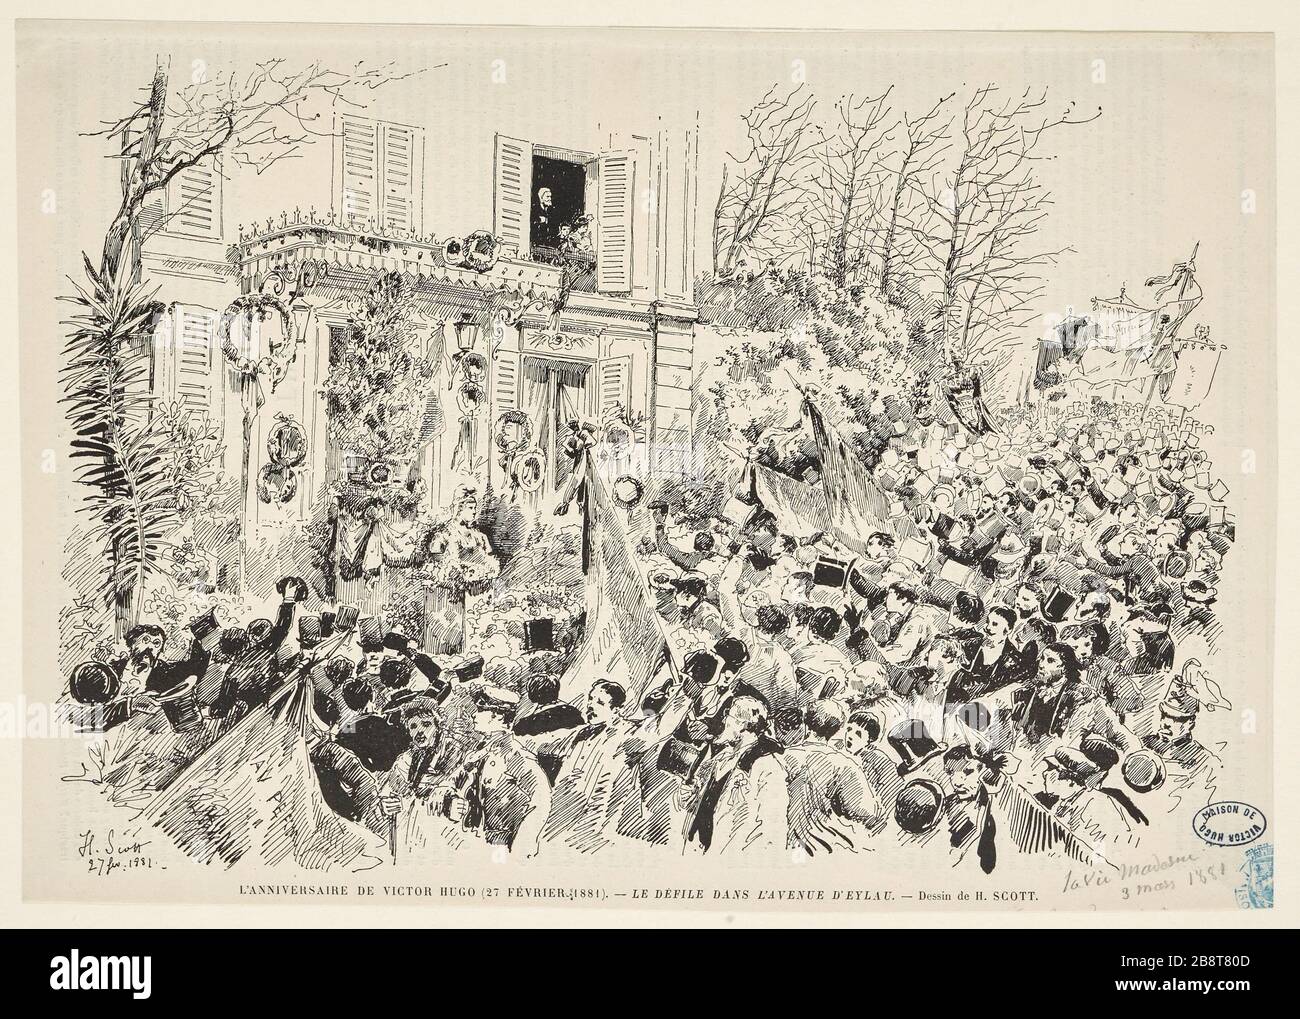 The anniversary of Victor Hugo (27 February 1881). The parade in the Avenue d'Eylau Stock Photo